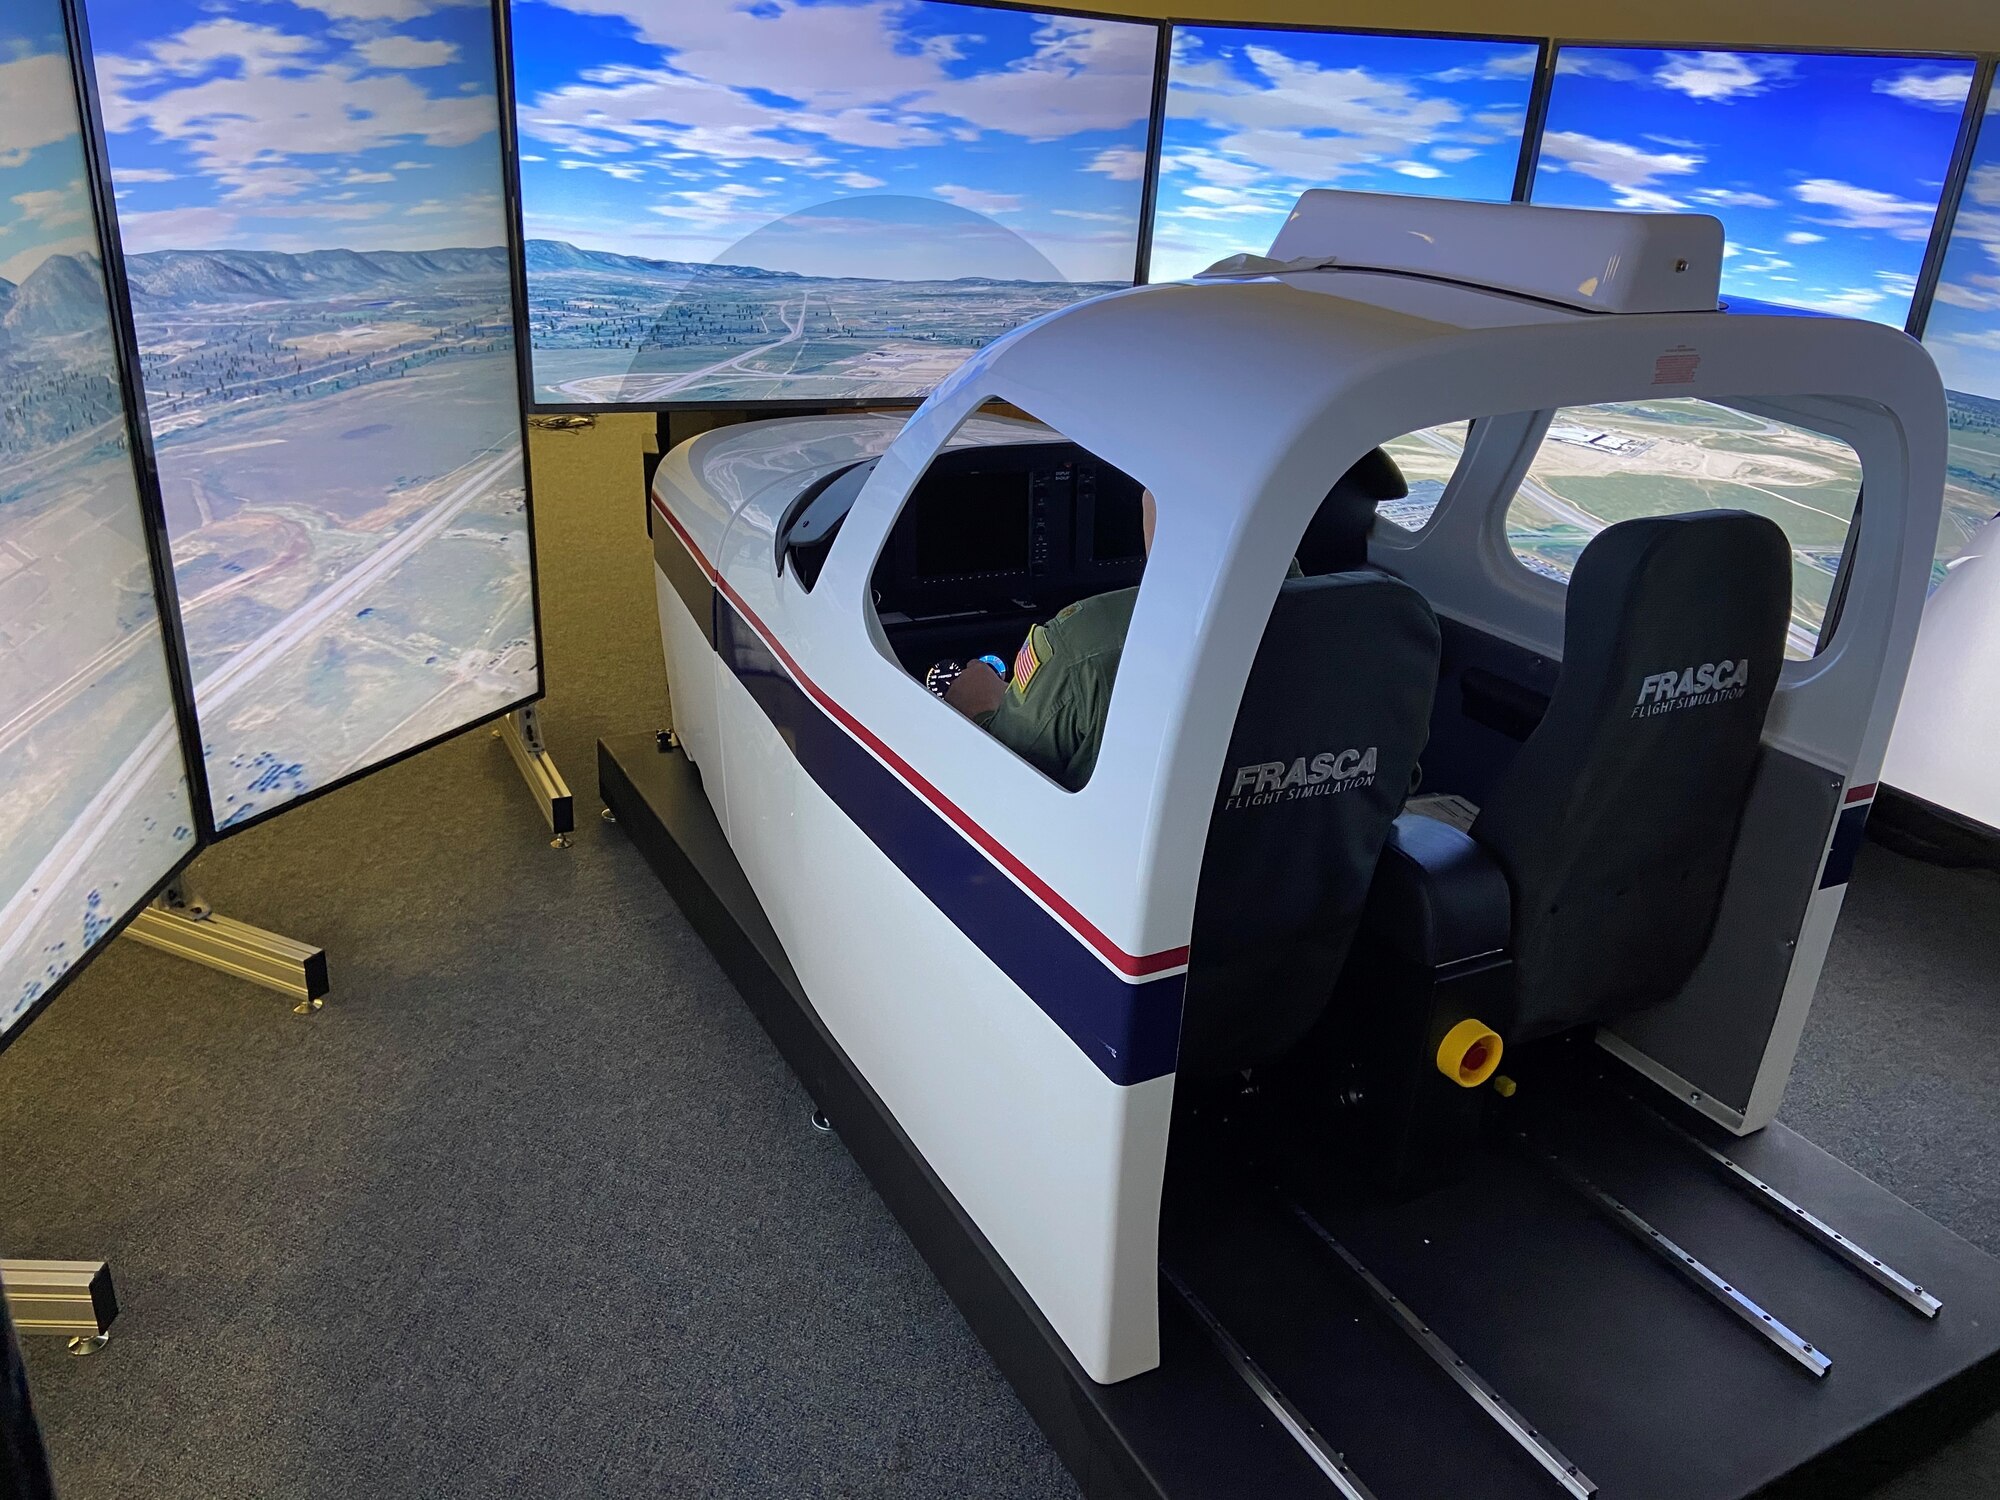 An aircrew training device or simulator, designed to replicate the look, feel and operation of a T-53 aircraft and improve pilot training in several areas, including emergency and safety procedures. The device is being used at the U.S. Air Force Academy, in support of the Powered Flight Program. (Courtesy photo)